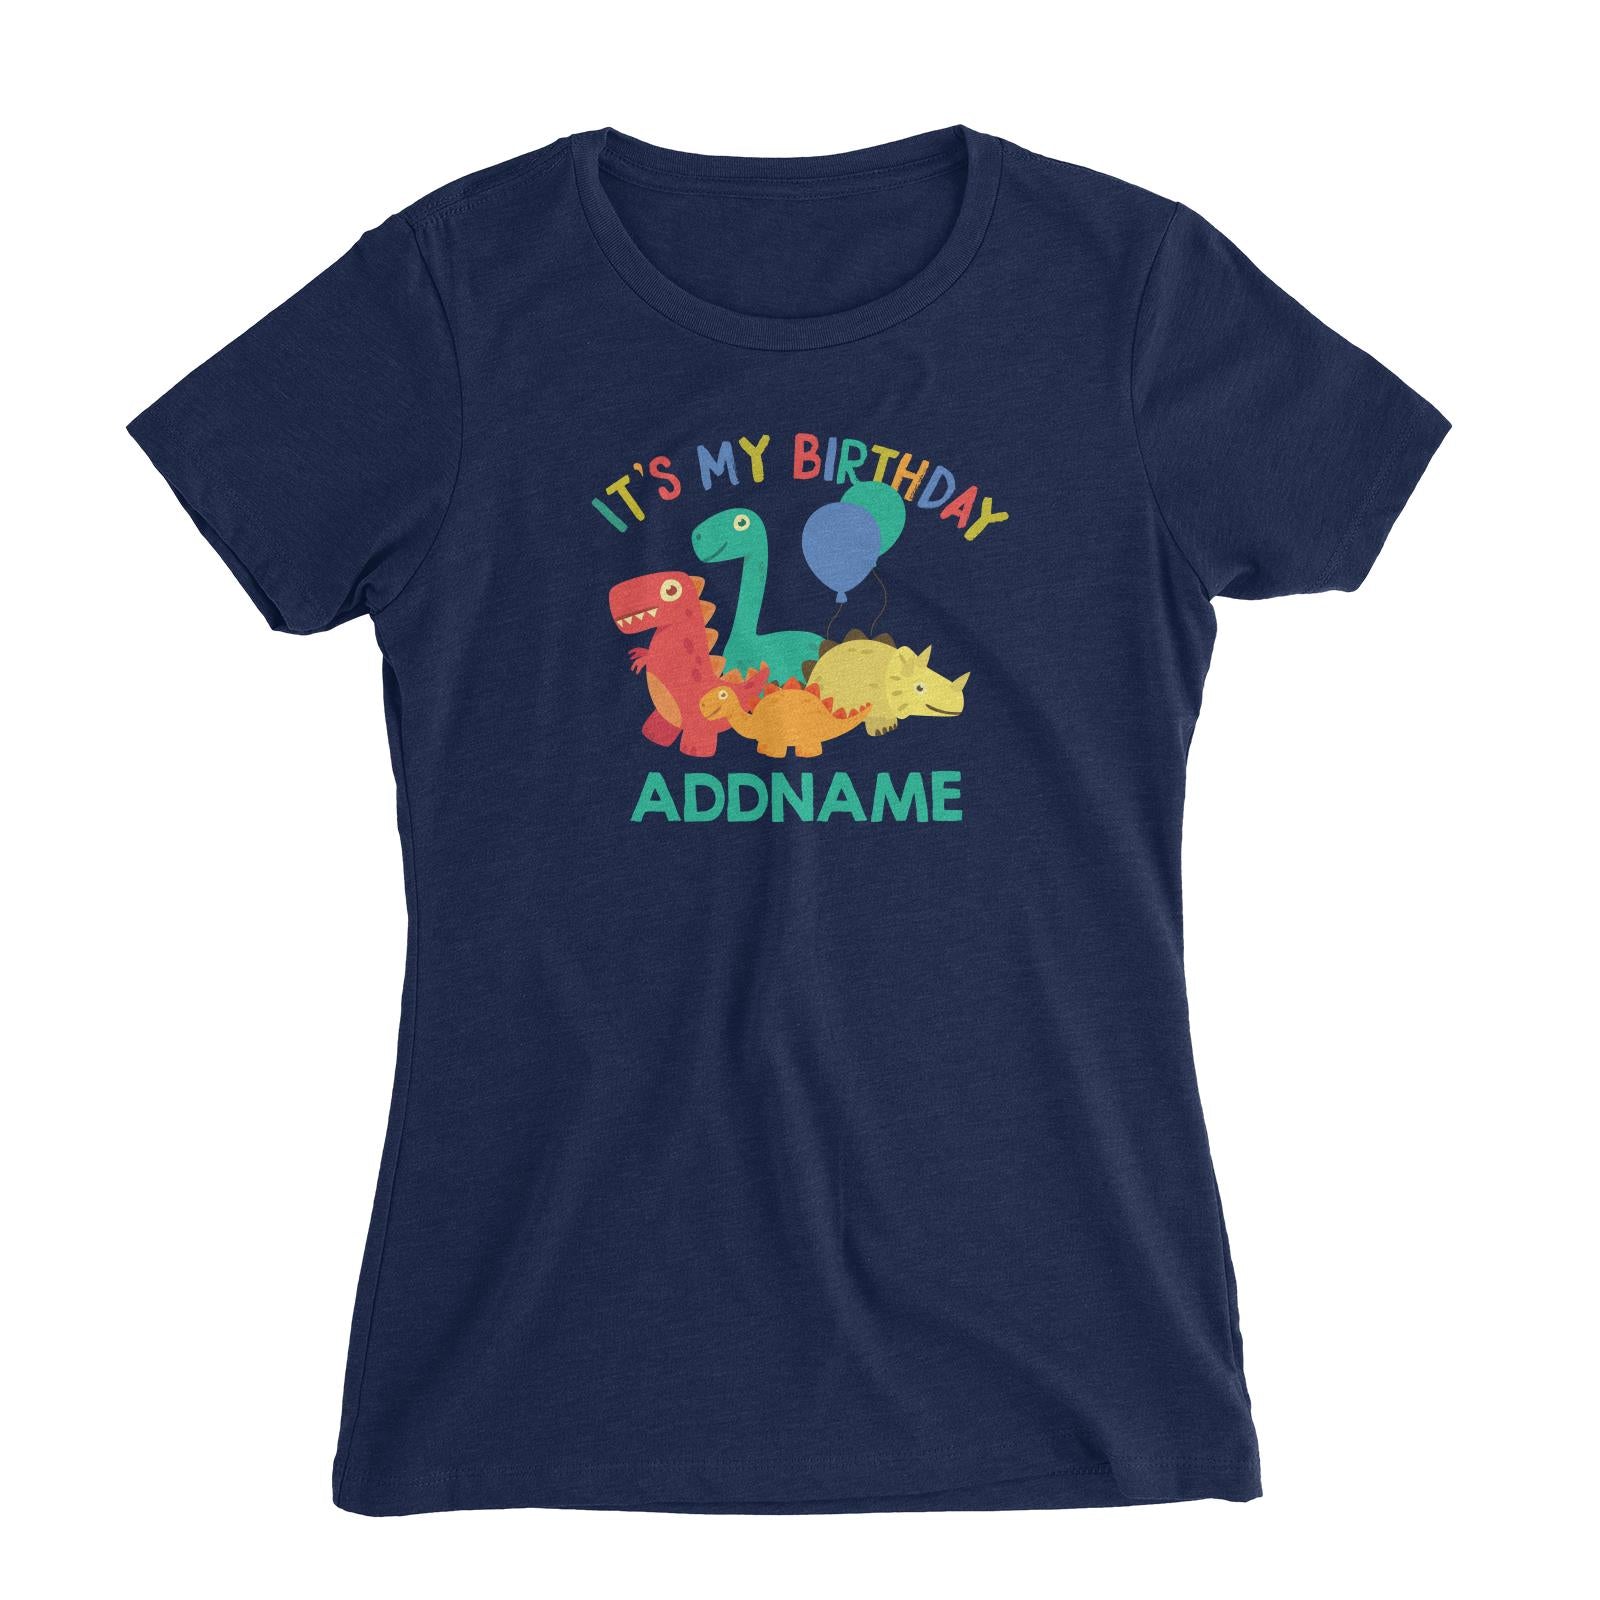 It's My Birthday Addname with Cute Dinosaurs and Balloons Birthday Theme Women's Slim Fit T-Shirt